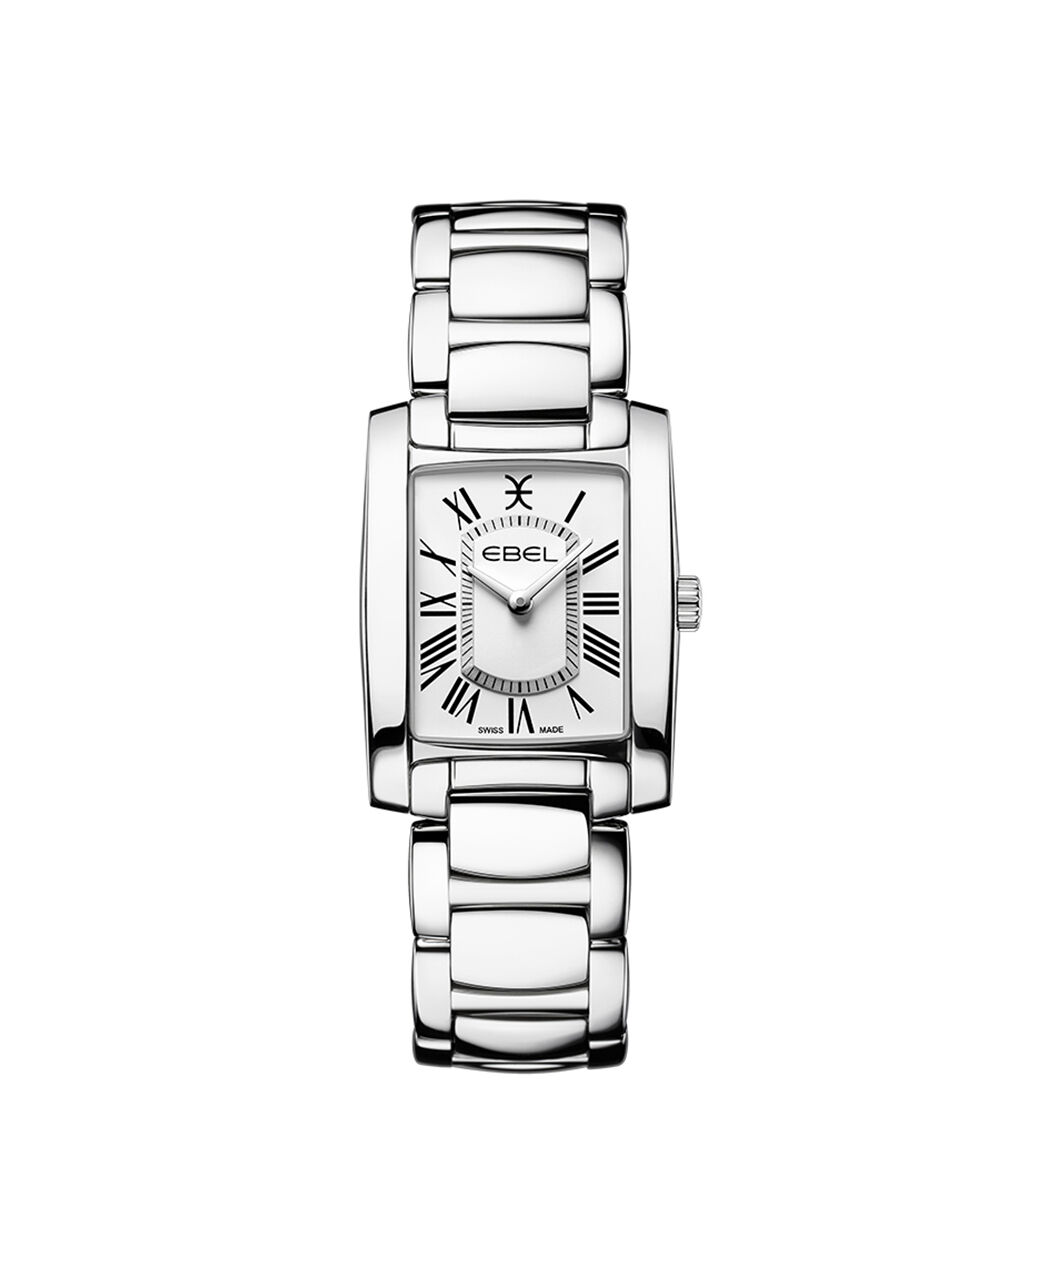 Fake Cartier Watch Serial Number